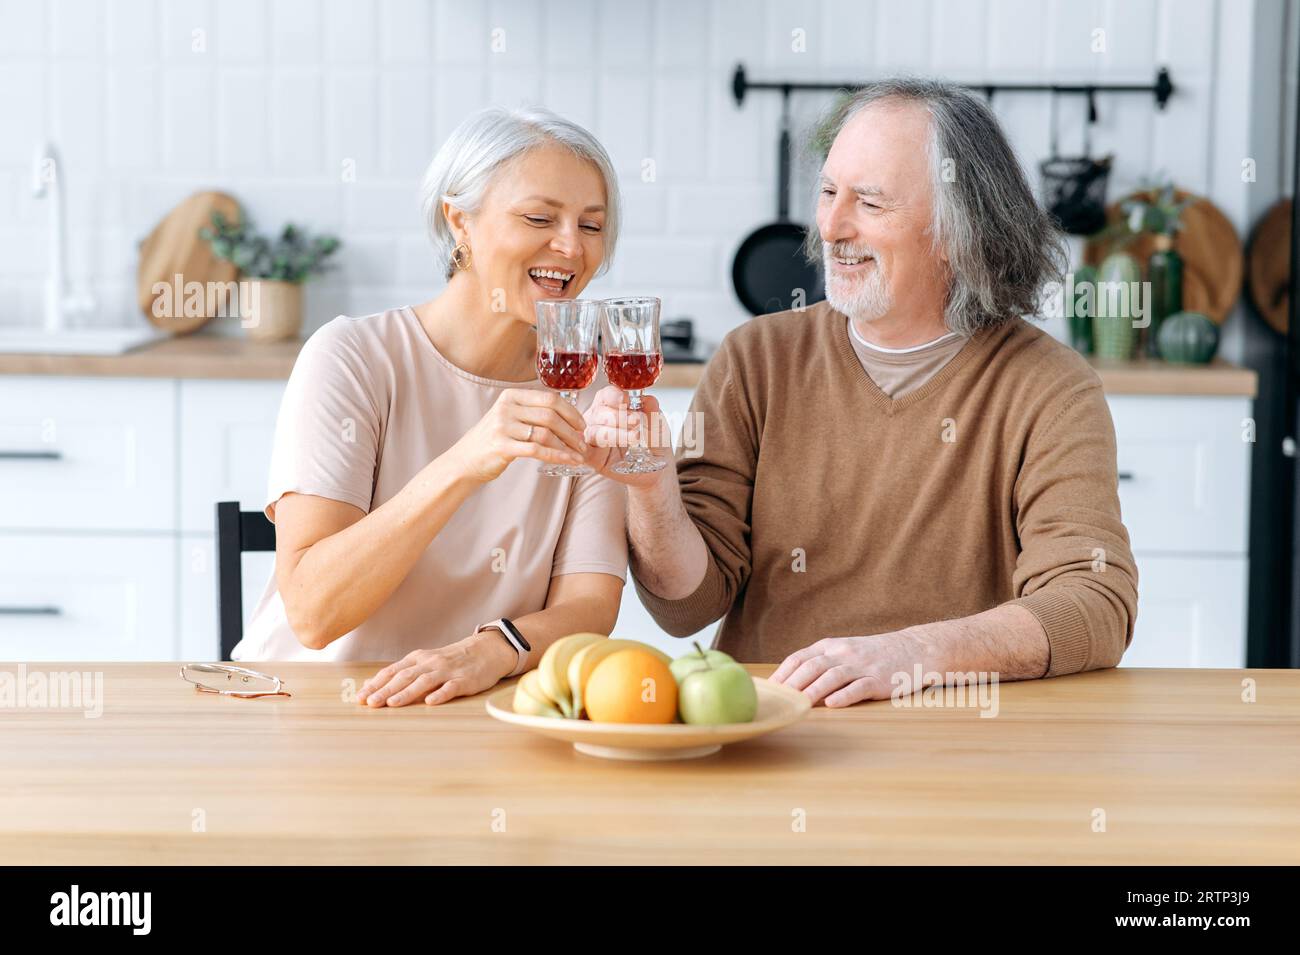 Cheers. Happy pensioners. Elderly caucasian spouses, sit at home in the kitchen, hold glasses of red wine in their hands, celebrate an important date, anniversary, look at glasses, smile joyfully Stock Photo